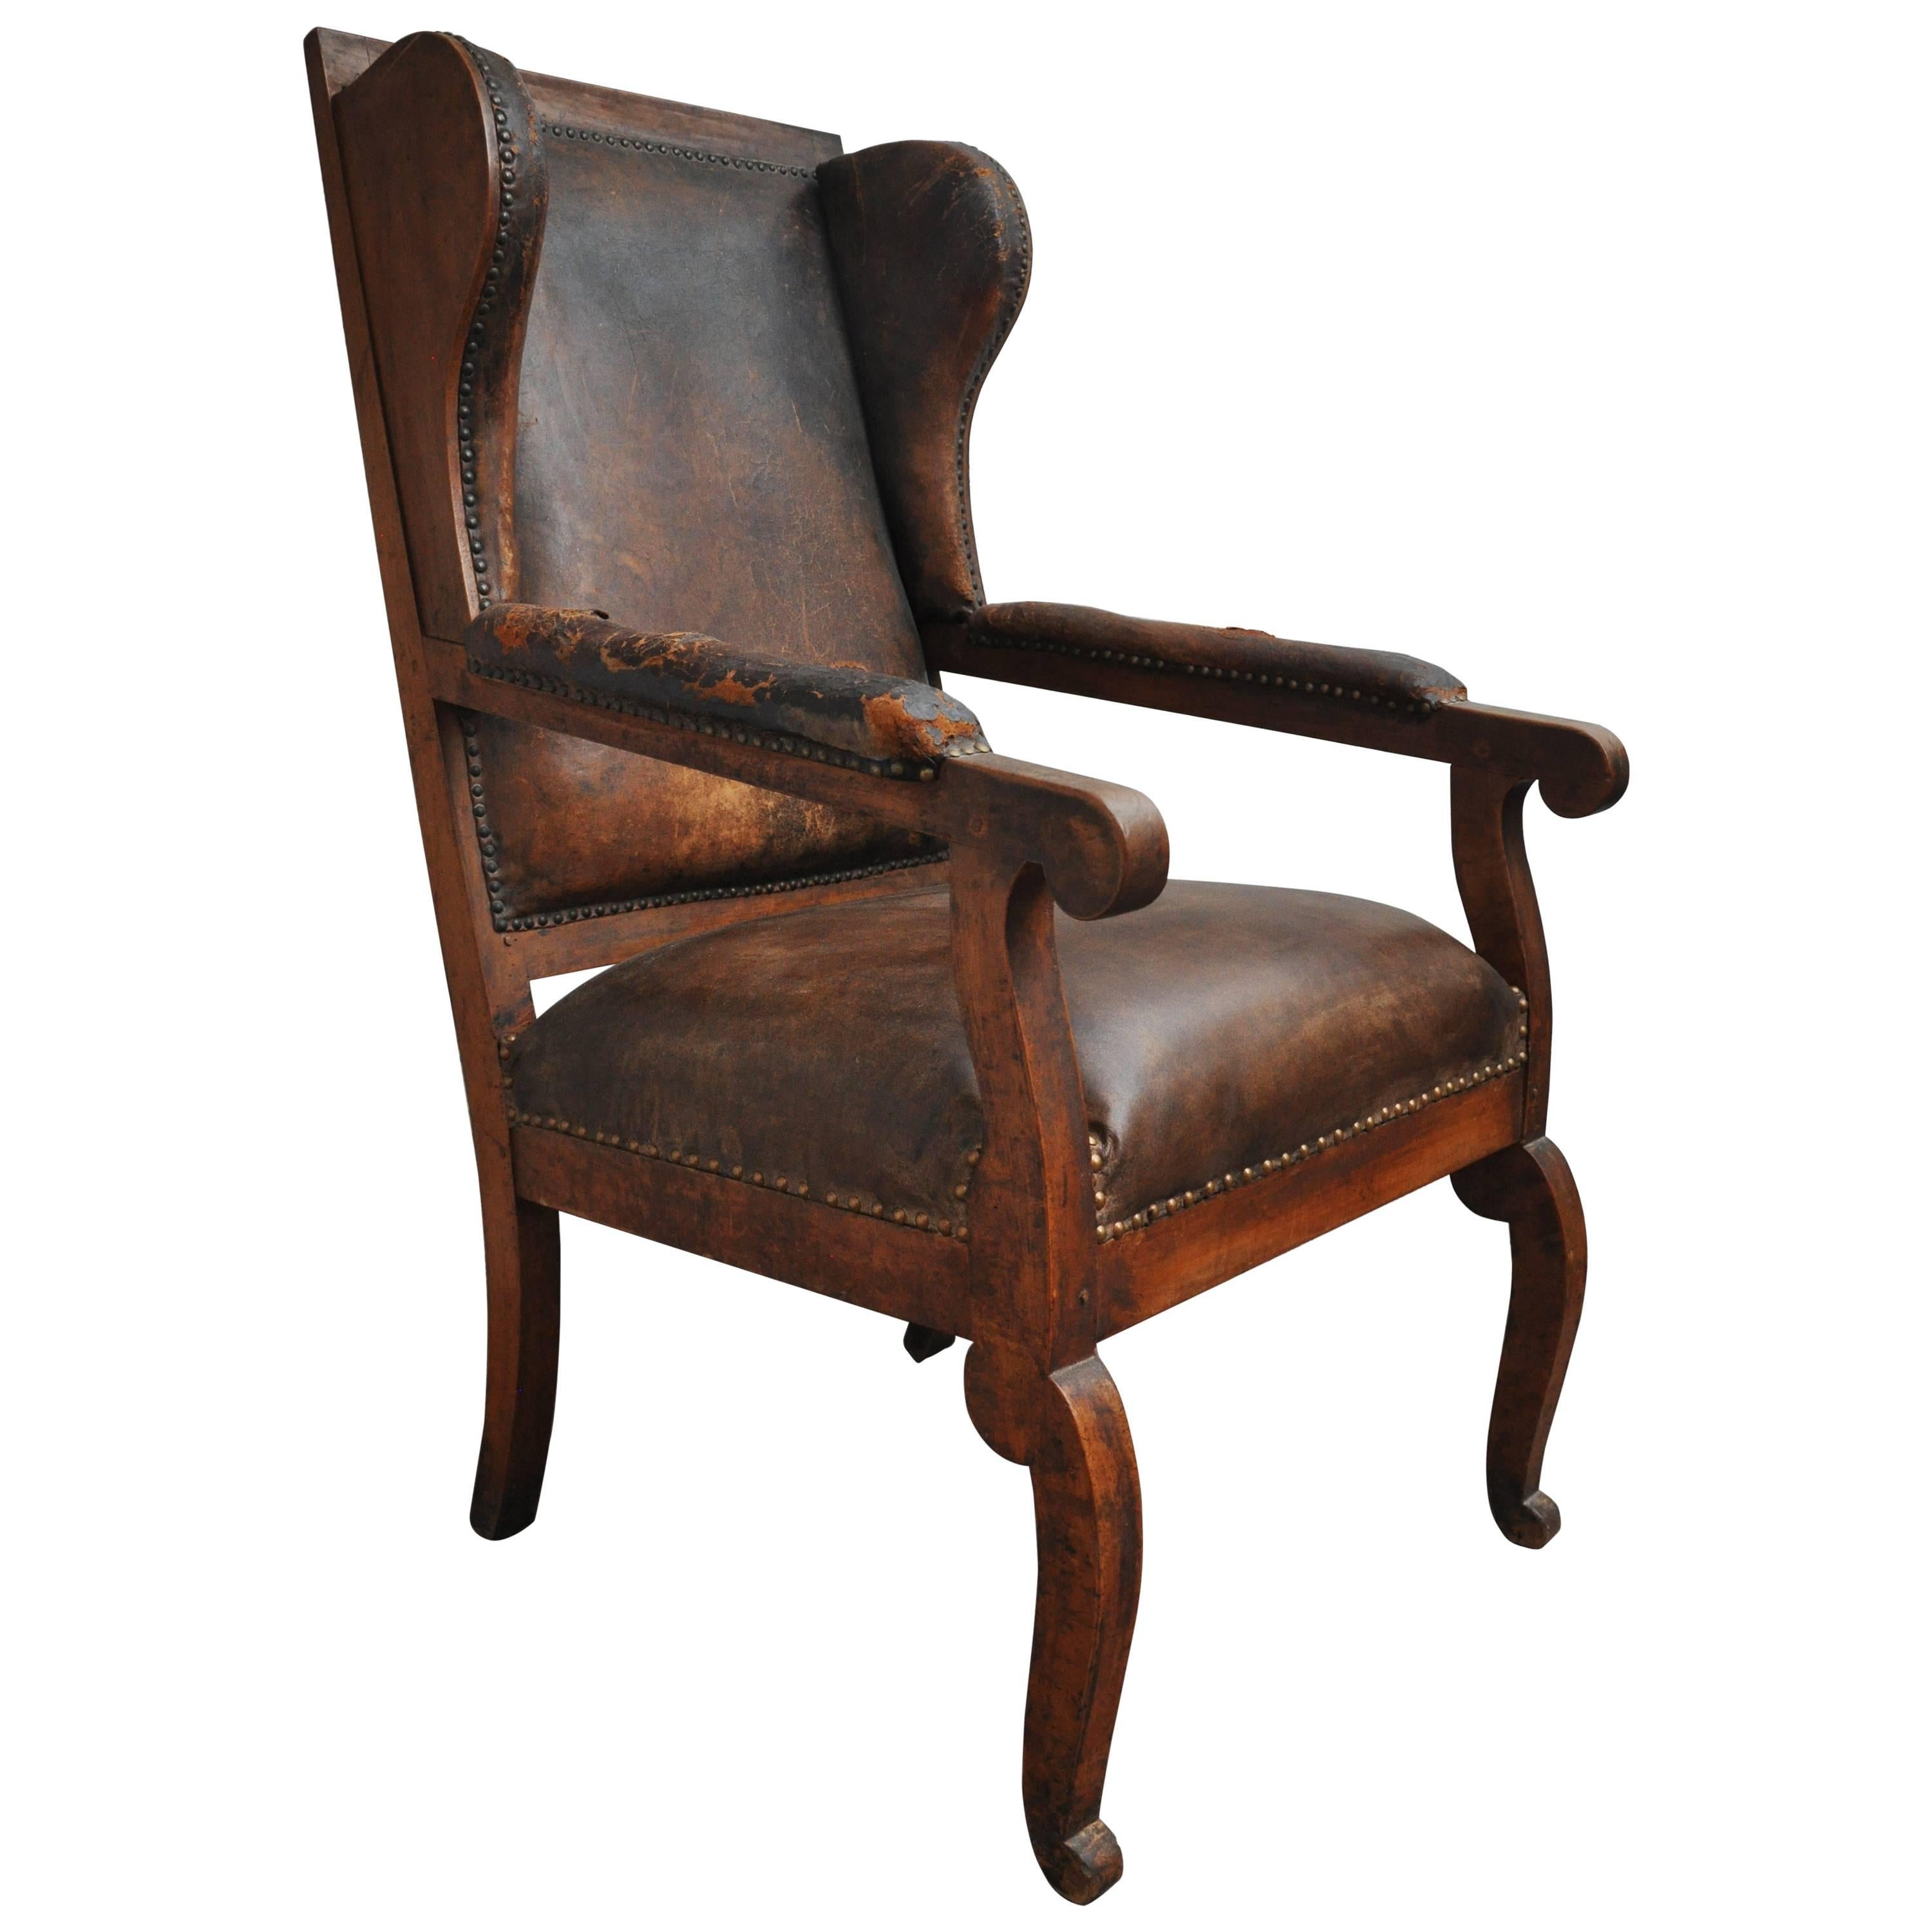 Late 19th century German Biedermeier high back wing chair.  The chair features the original antique leather arms and back (Seat recently reupholstered). Nailhead detail. Exposed wood frame and features original burlap upholstery on the back of